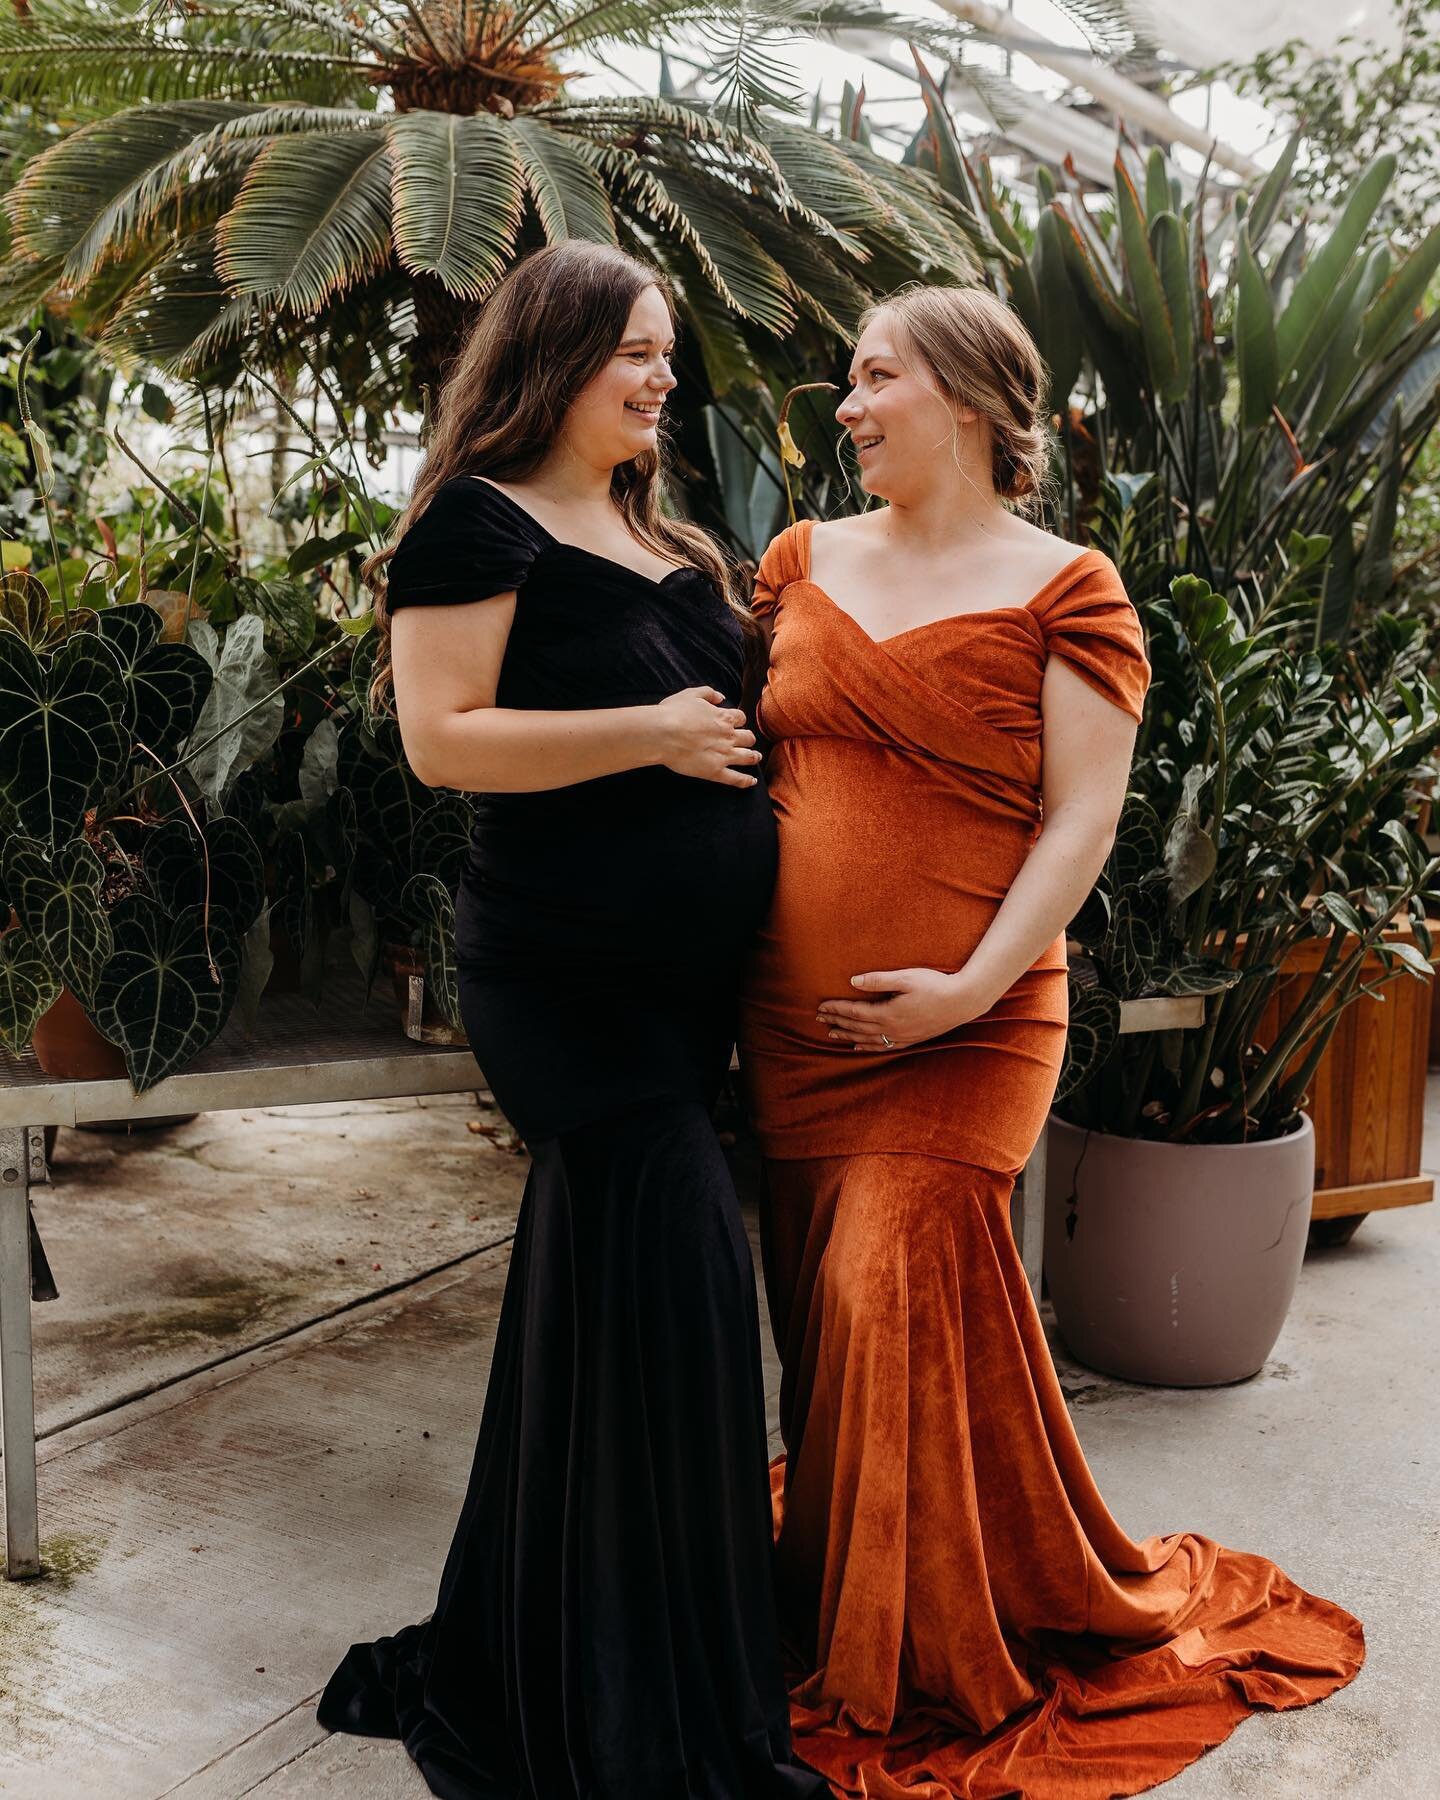 bestie pals zoe + tori got to model my reign &amp; madison dresses the other day 🔥 

#maternitysessions #besties #maternitymodelcall #velvetdress #greenhousesession #jberphotographer #jbermaternityphotographer #richmondvaphotographer #richmondva #vi